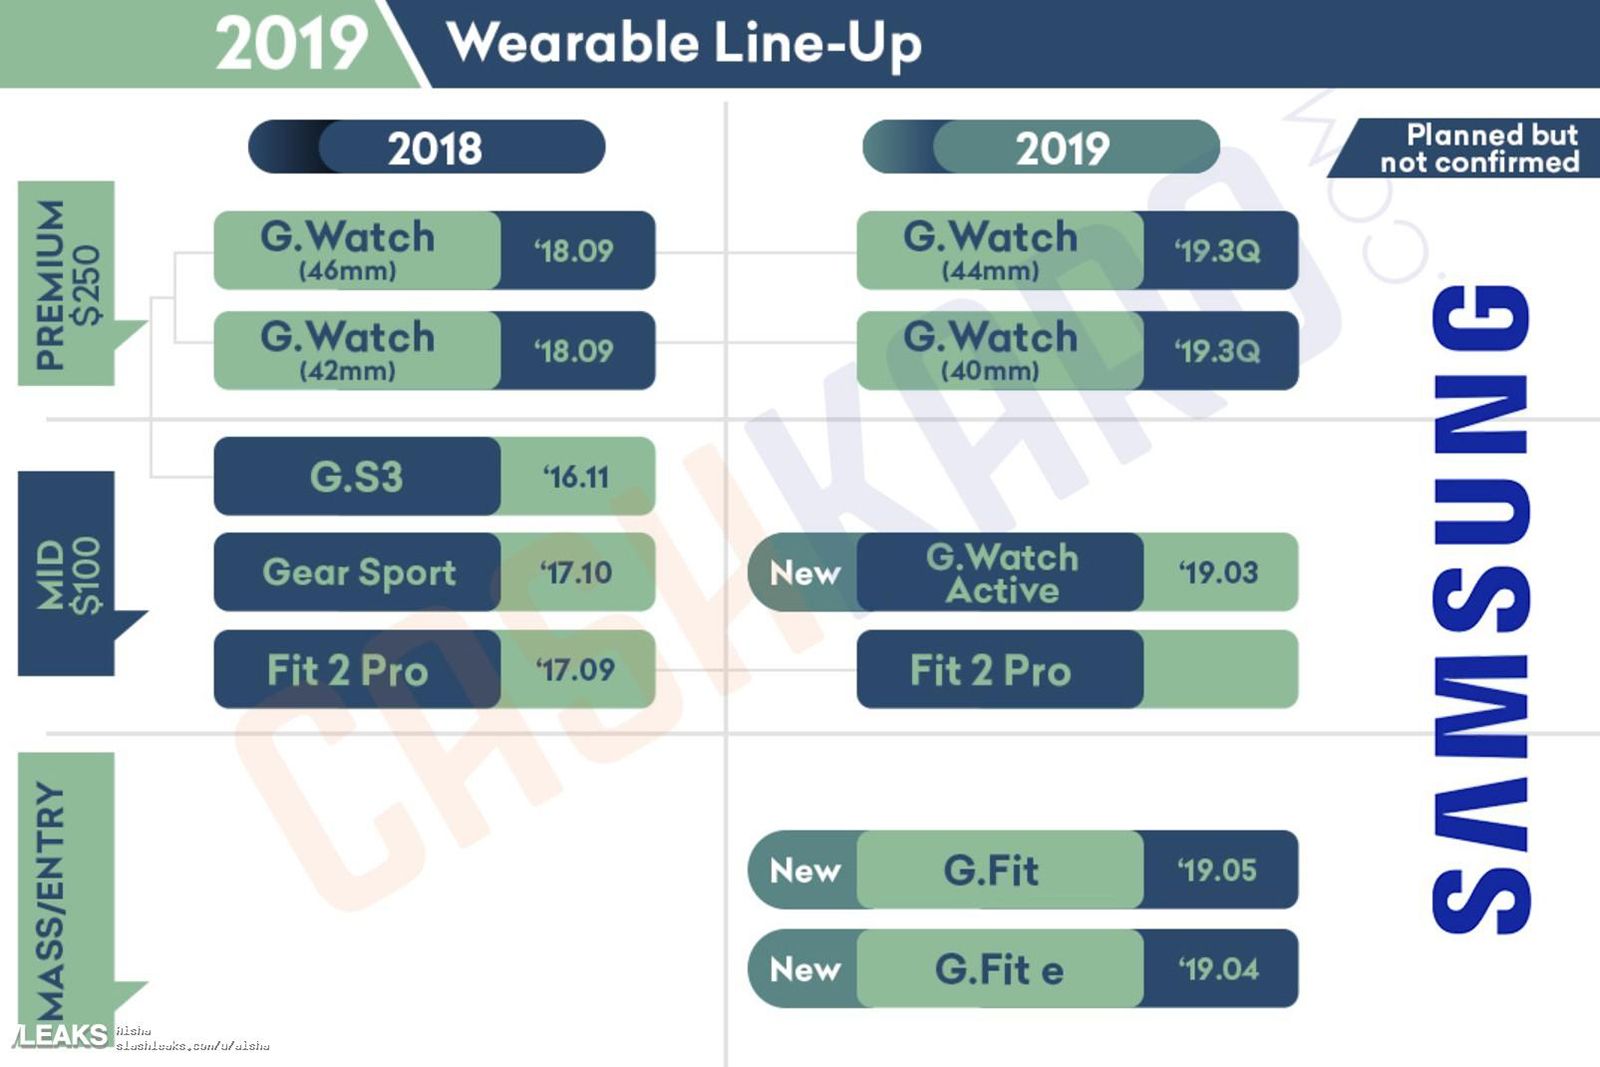 Leaked Samsung Roadmap Reveals Galaxy Watch 2 And Tab S5 Will Arrive In Q3 image 2